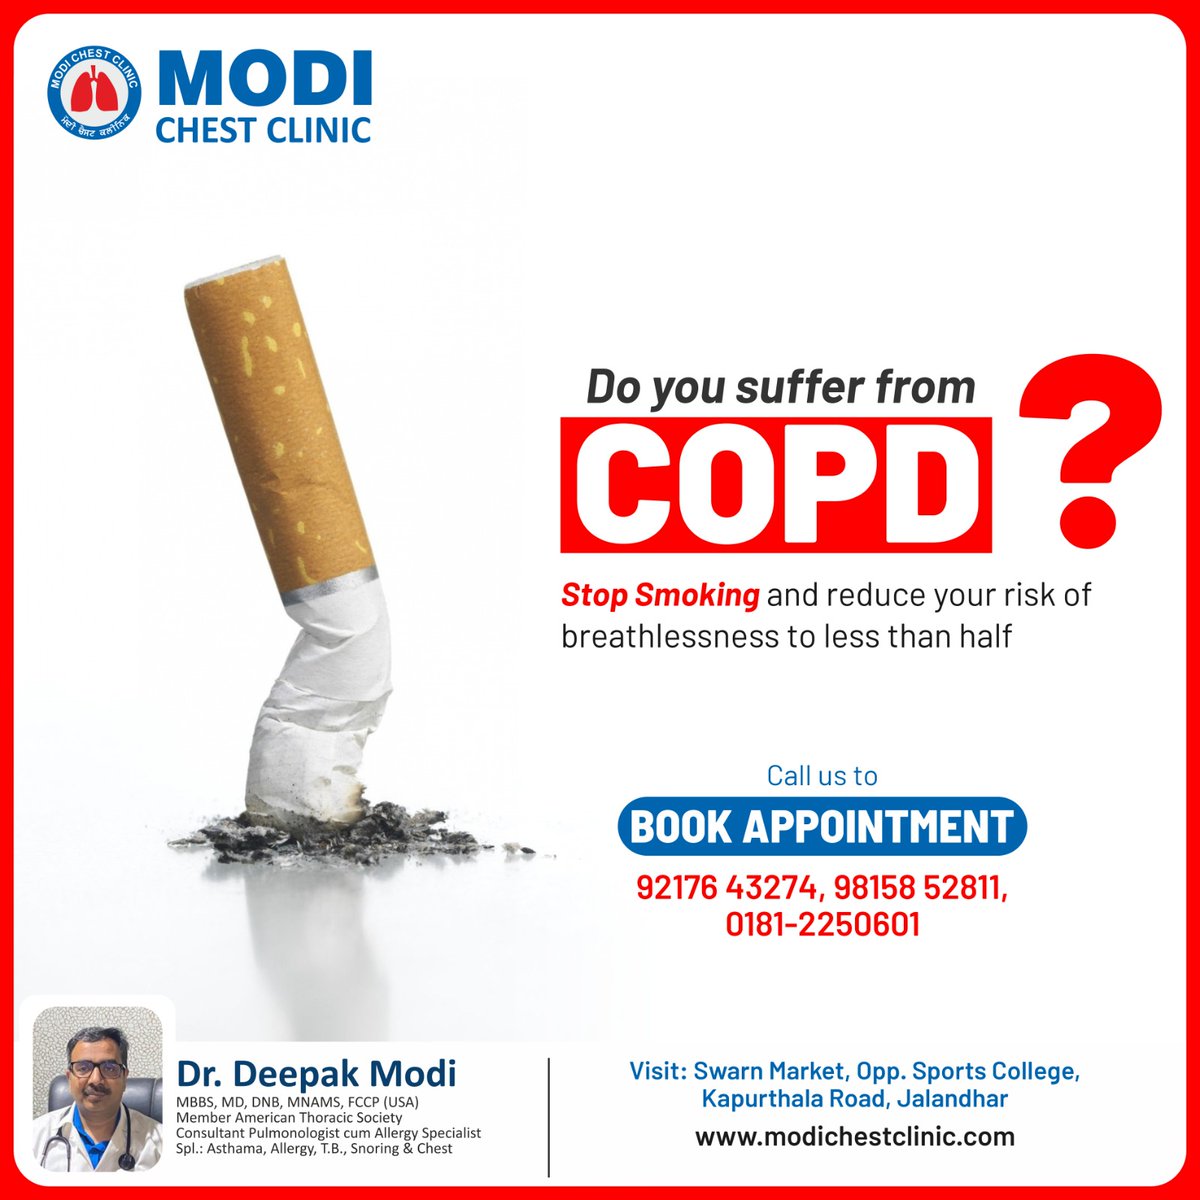 Do you suffer from COPD ? 
Stop Smoking and reduce your risk of breathlessness to less than half

Call us to BOOK APPOINTMENT : 
92176 43274, 9815852811, 0181-2250601

#copdtreatment #chest #copdawareness #copdcheckup #COPD #copd #copdfoundation #copdtreatment